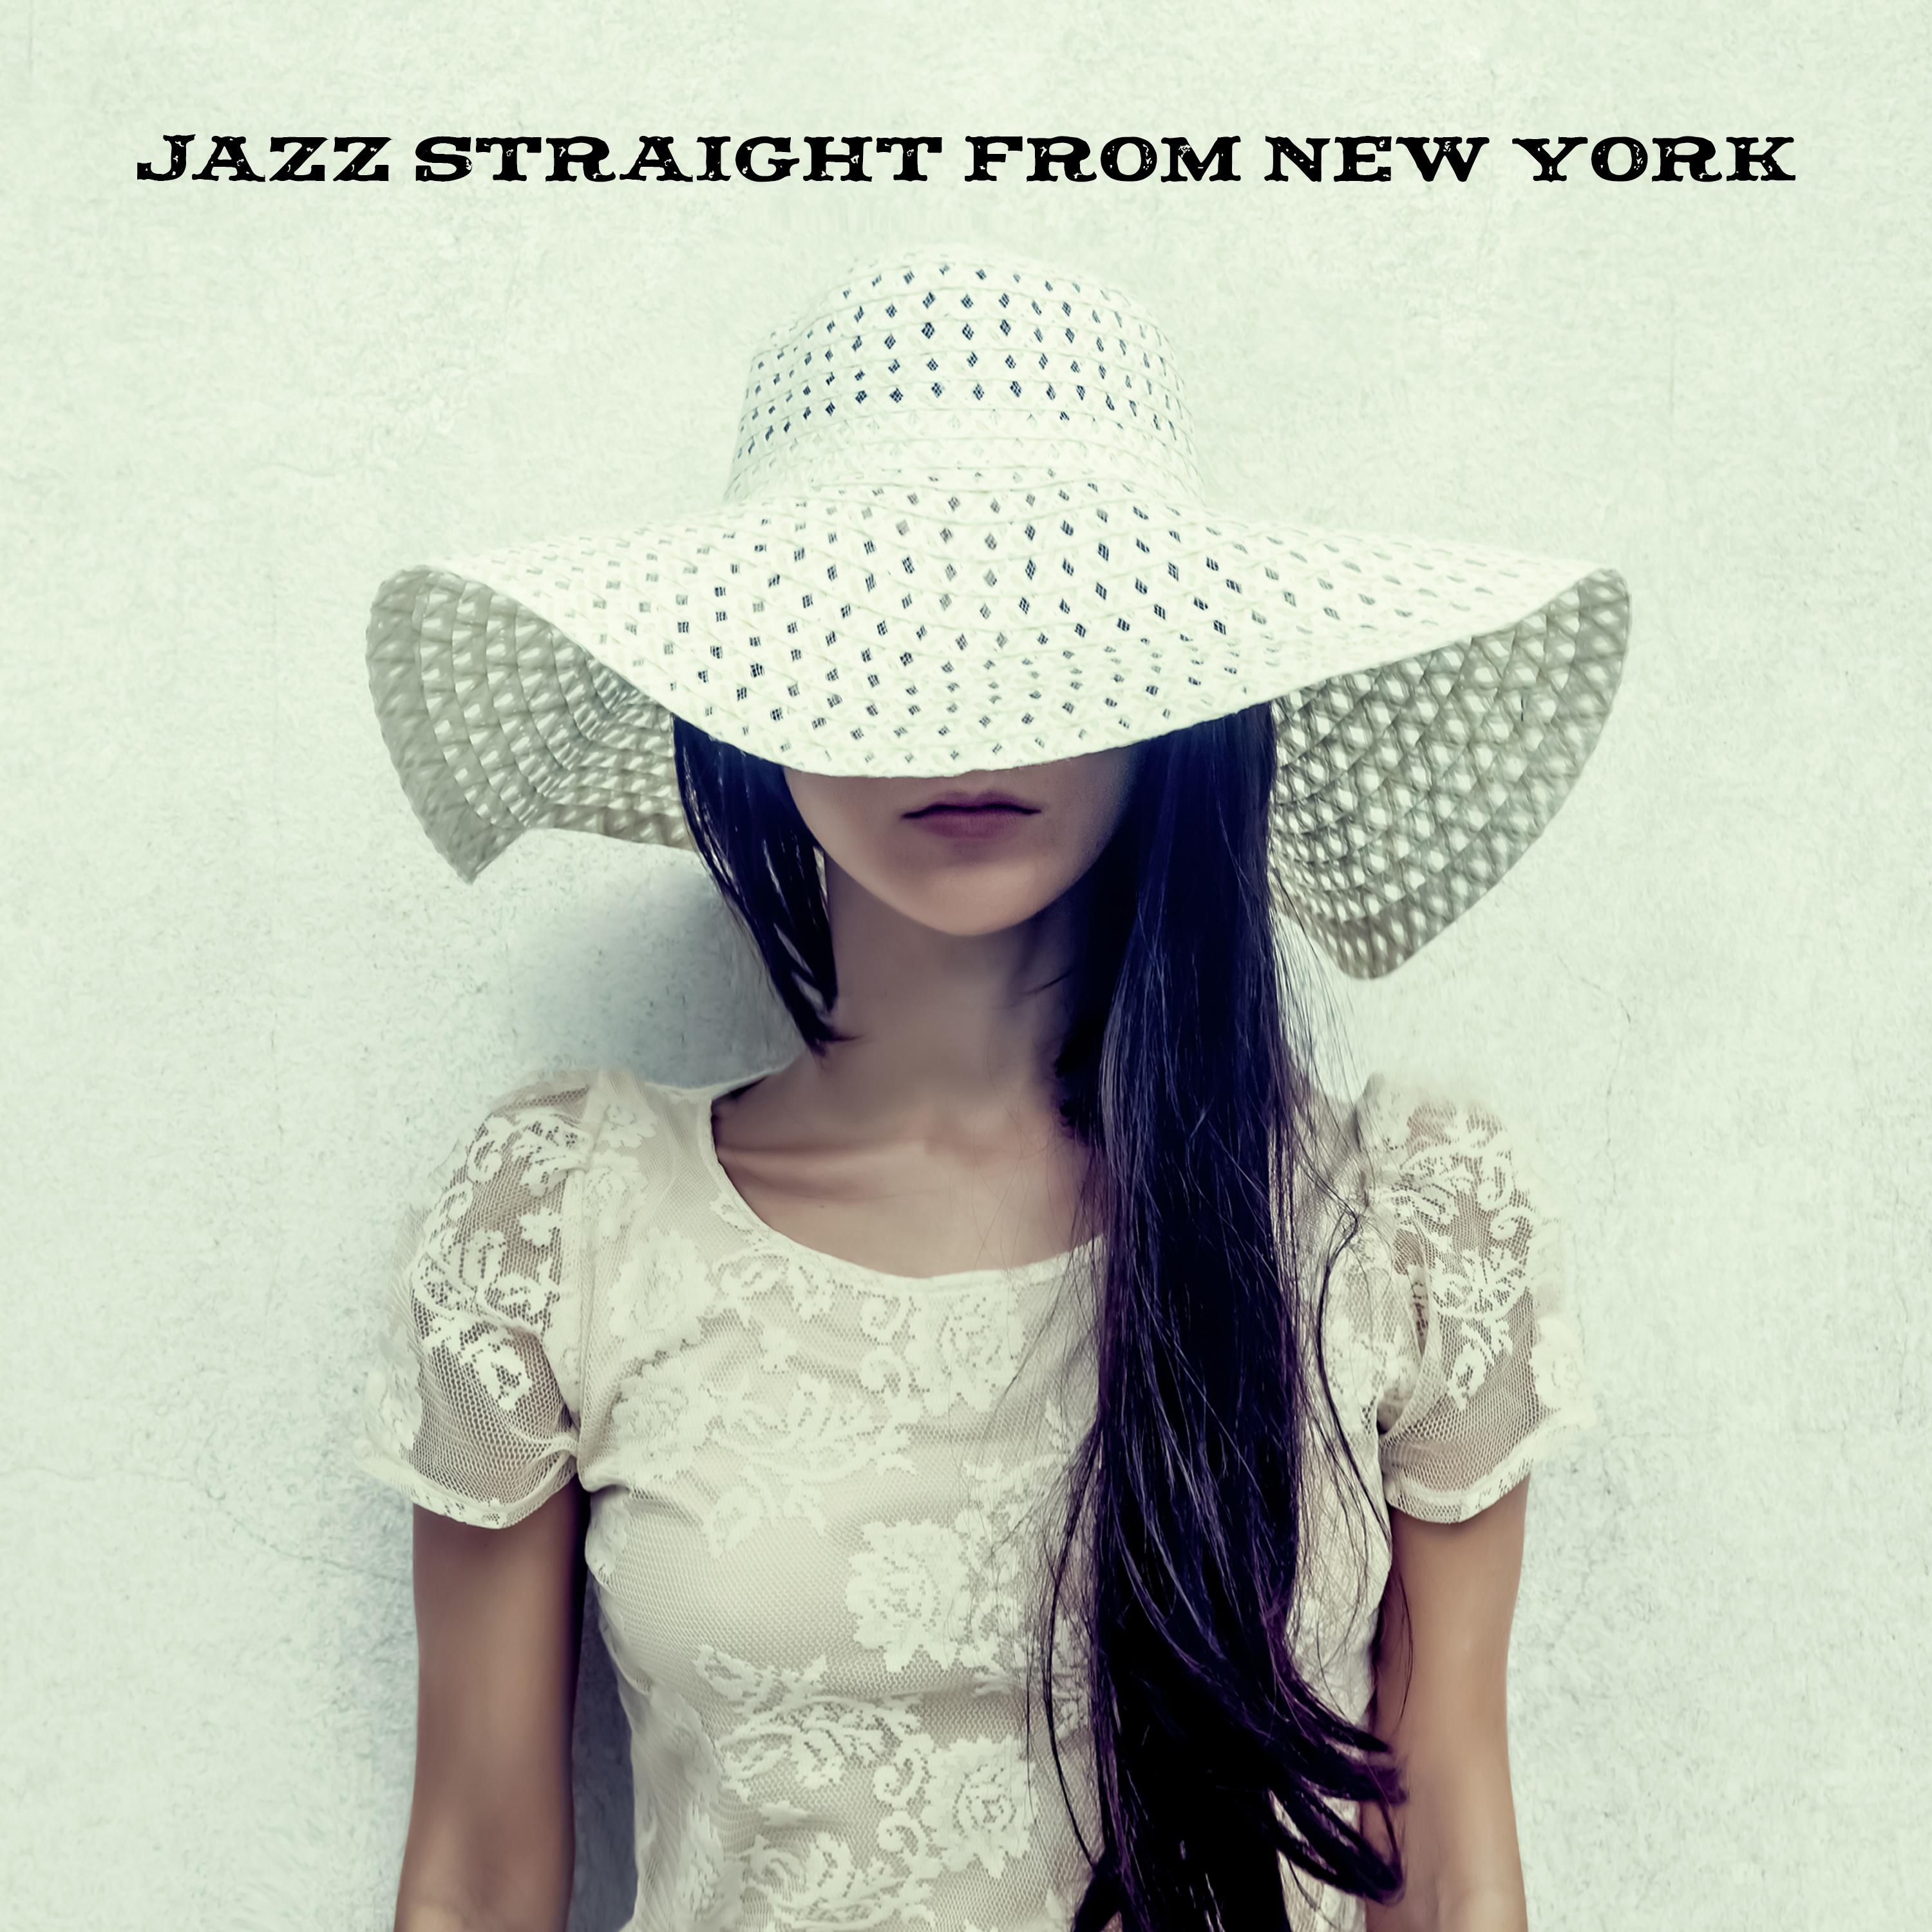 Jazz Straight from New York  2019 Instrumental Smooth Jazz Music Compilation, Vintage Melodies Played on Piano, Contrabass, Sax  Many More